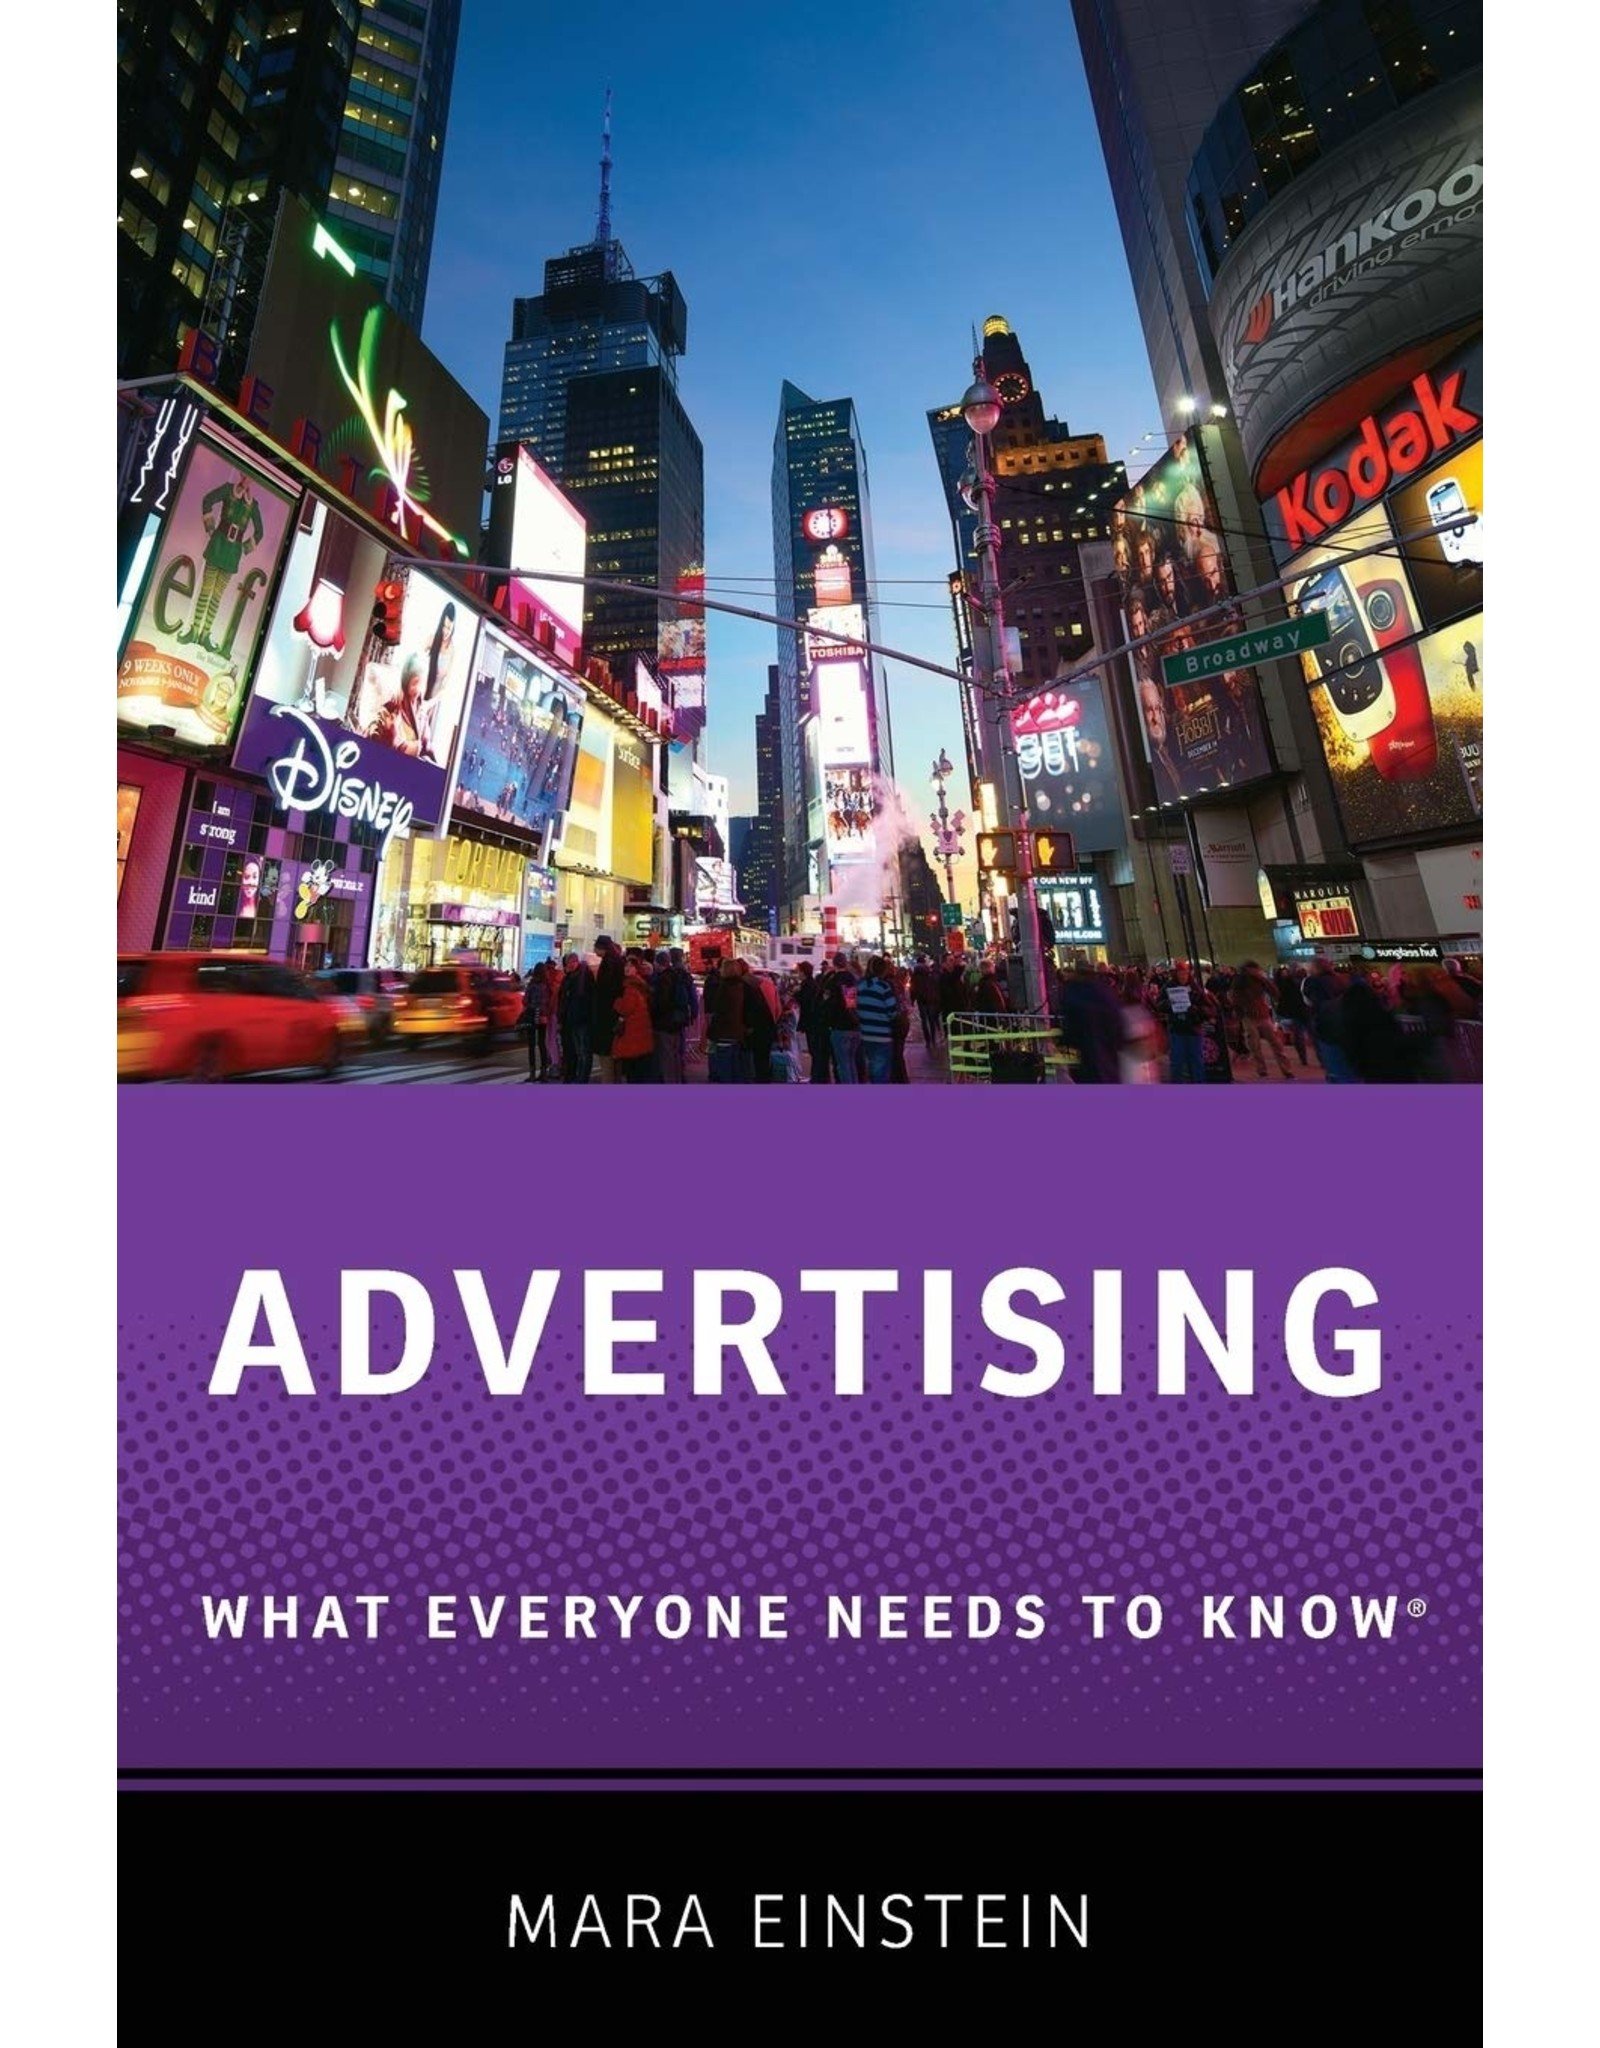 Textbook Advertising: What Everyone Needs to Know